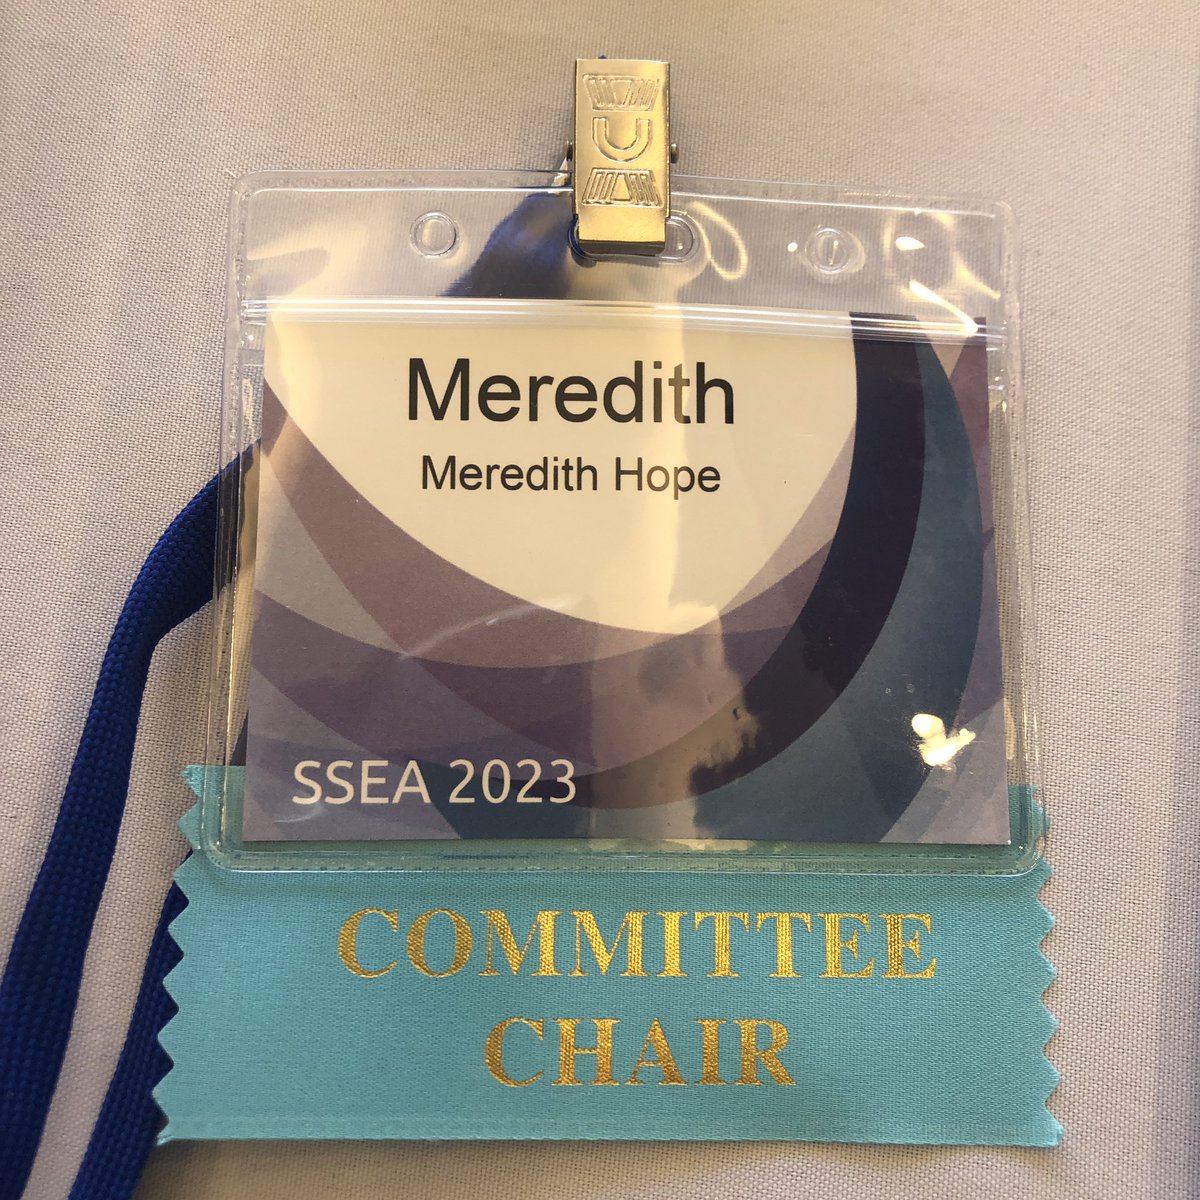 Thrilled to be on the ground in San Diego for the 2023 biennial meeting of @SSEmergingAdult! #SSEA2023